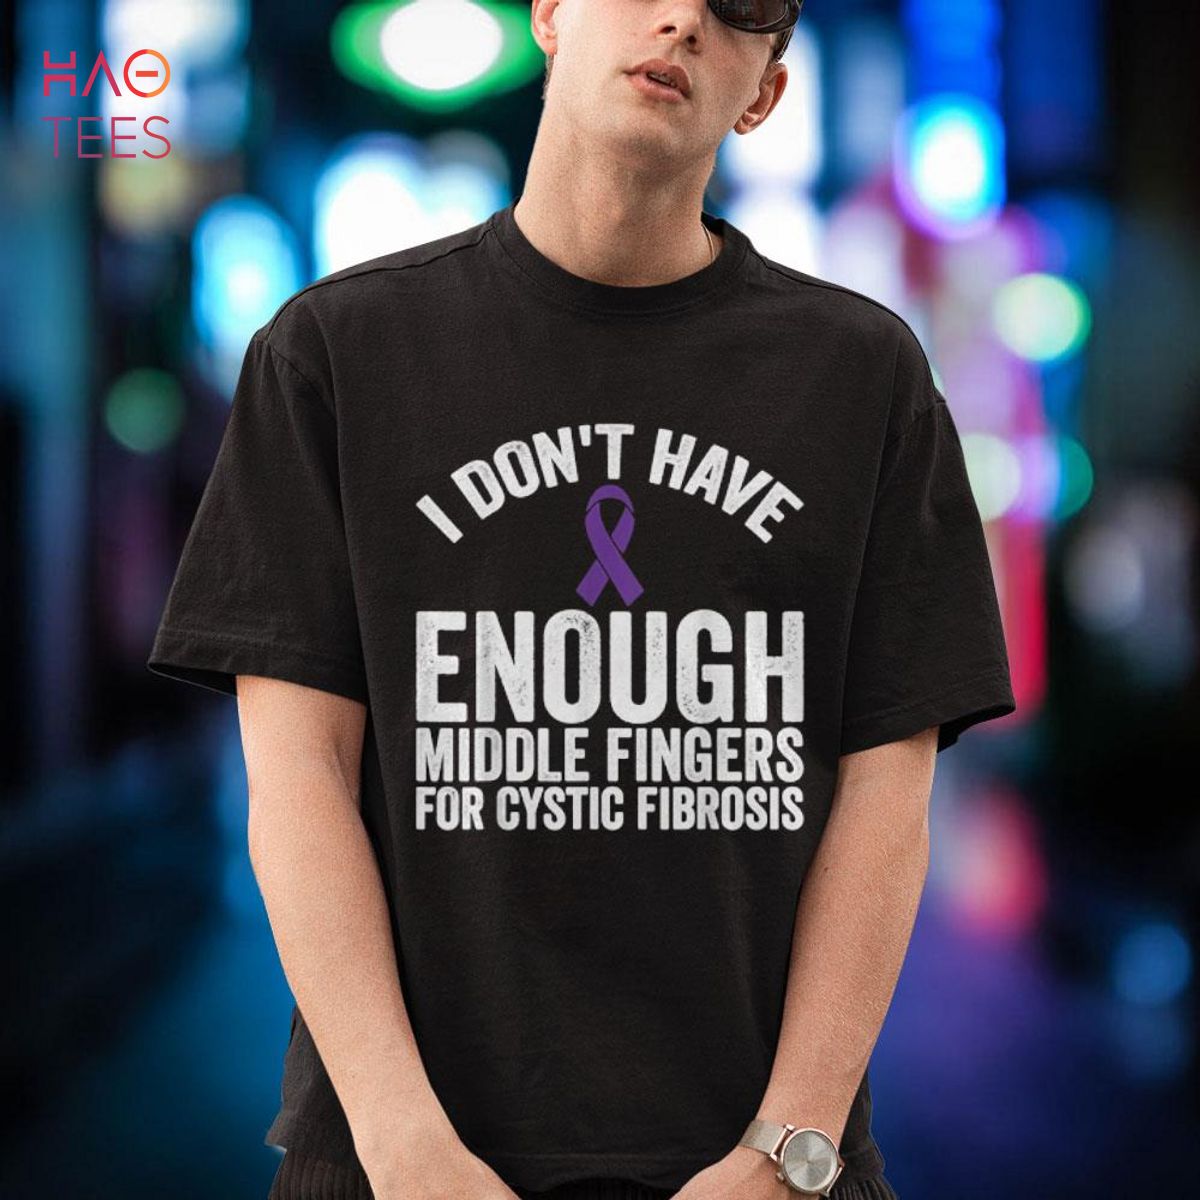 Awareness – Don’t Have Middle Fingers For Cystic Fibrosis Shirt